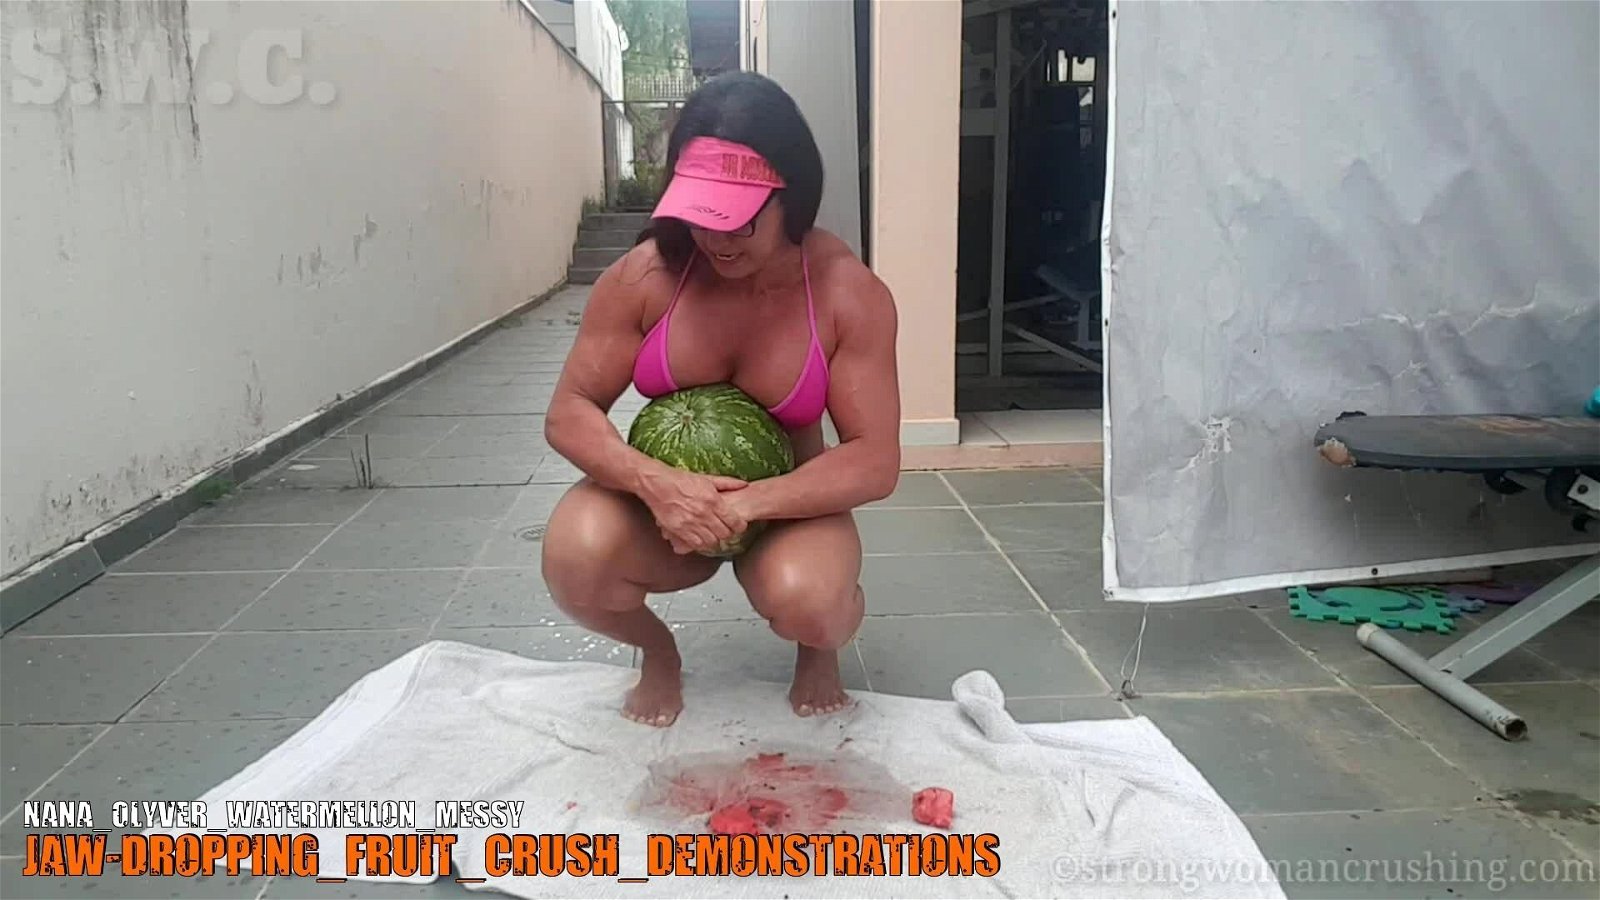 Photo by MusclegirlStrength with the username @MusclegirlStrength, who is a brand user,  September 22, 2023 at 3:01 PM and the text says '🍉🤩Who's ready to watch the hilarious video of 🤴Nana Olyver eating Watermelon 🍉Messy with Nana? 🤩Get your membership & watch now at www.strongwomancrushing.com 🤩 #watermelon #NanaOlyver #messywithNana #strongwomancrushing #membership'